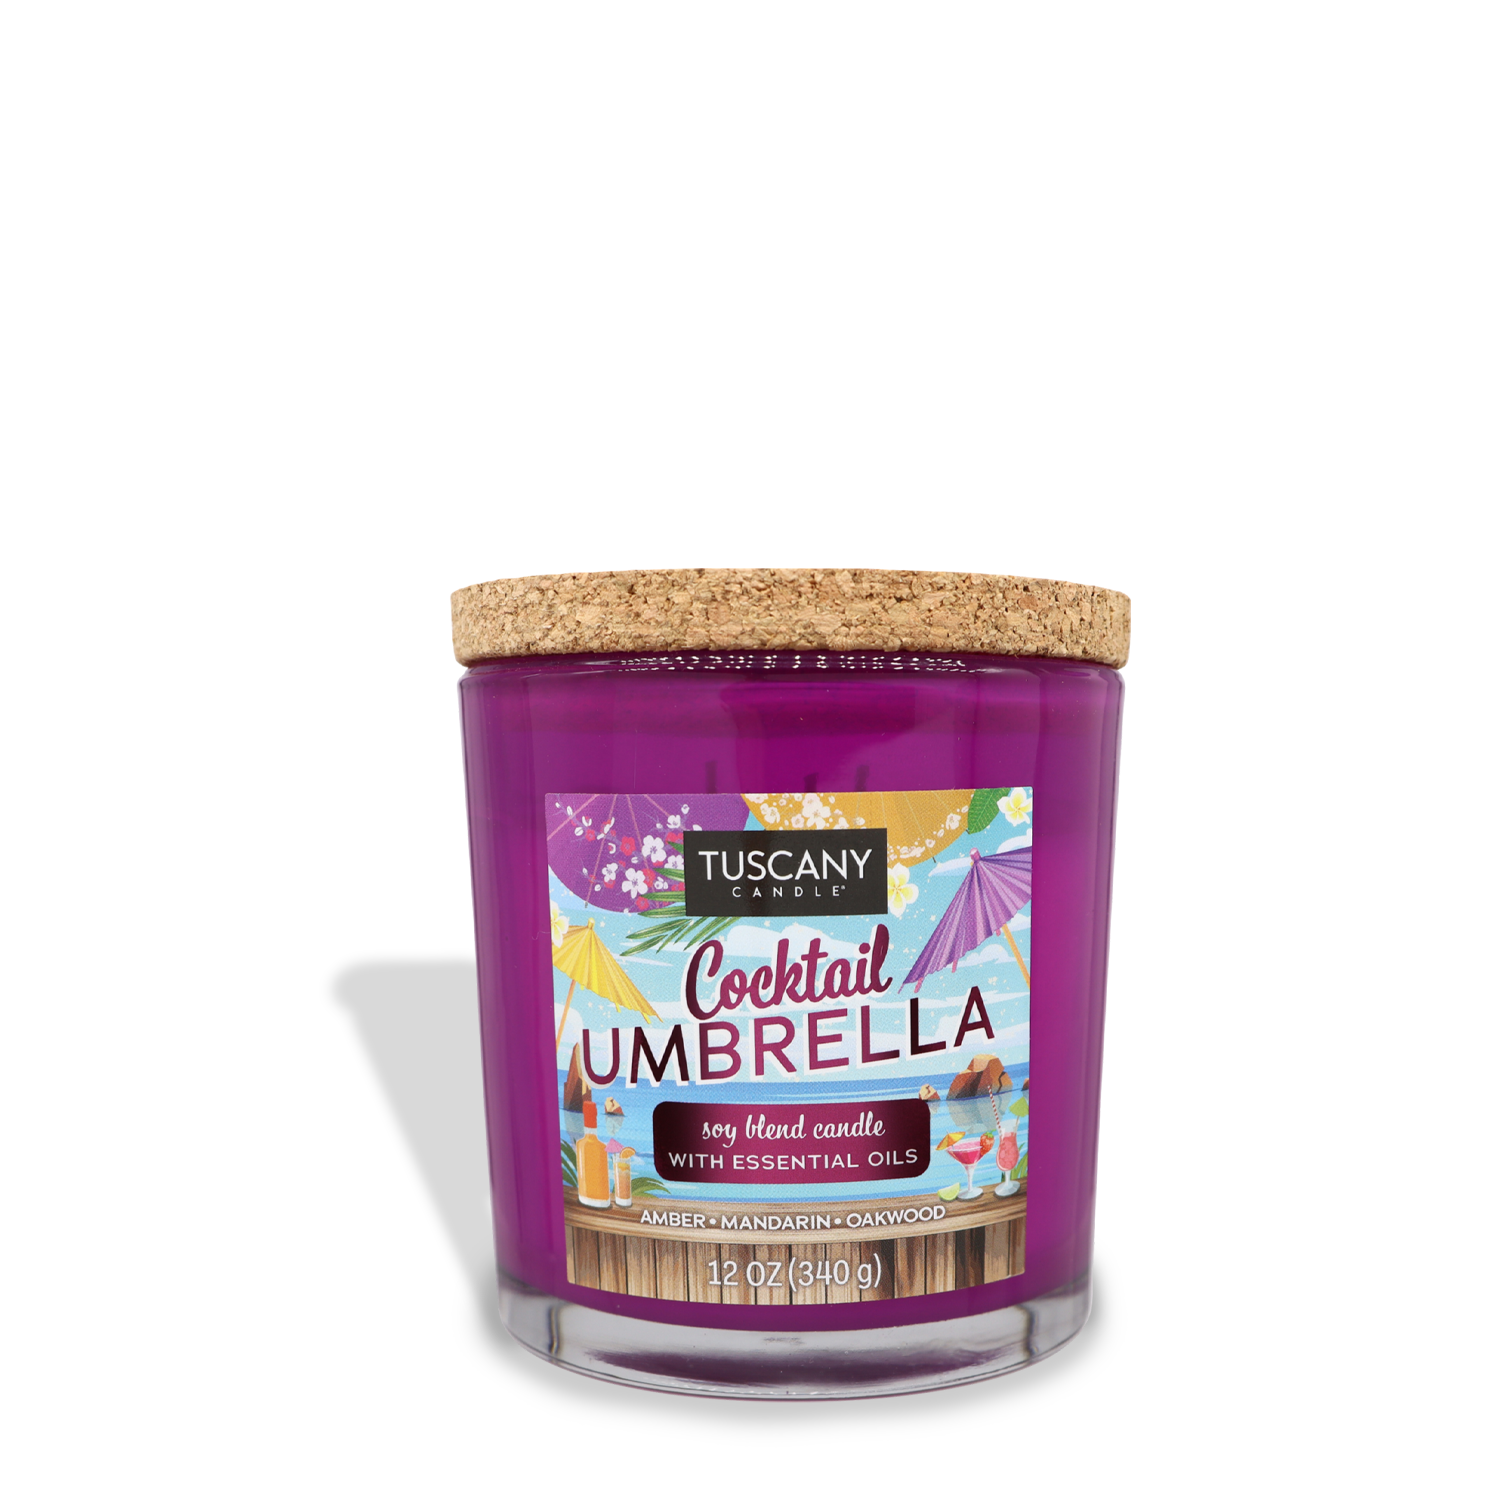 A purple Tuscany Candle® SEASONAL labeled "Cocktail Umbrella (12 oz) – Sunset Beach Bar Collection," a soy blend candle with essential oils, in an Amber Mandarin Oakwood scent. The candle has a cork lid and weighs 12 oz (340g).